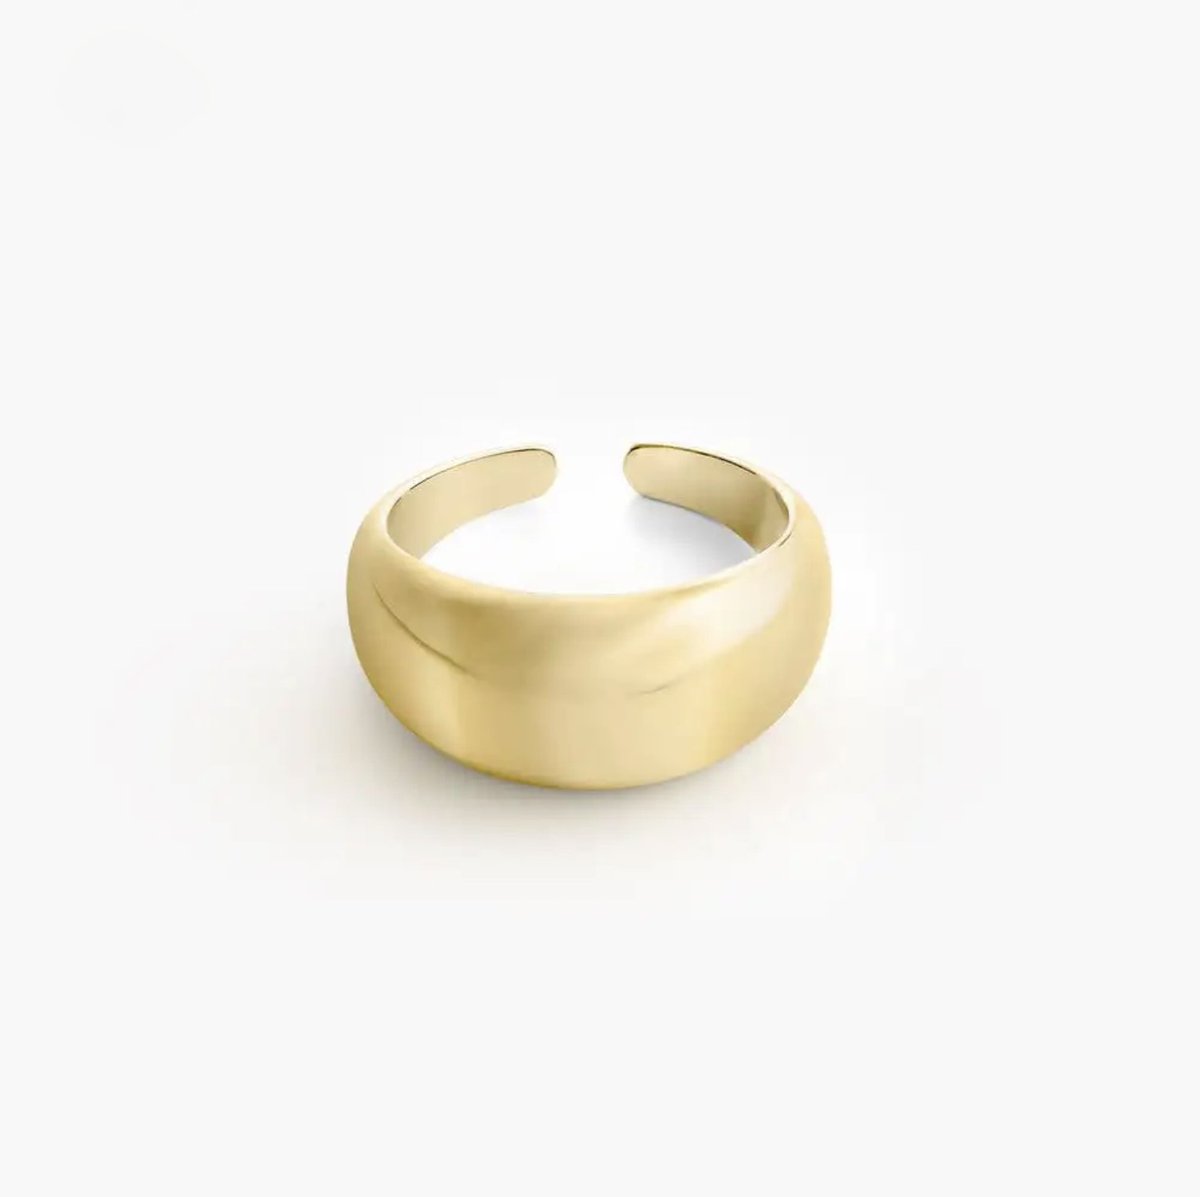 The stocking stuffer you've been waiting for ✨ What do you want to get in your stocking this year? 🎄 Our Dome Ring is available in Silver, Gold Vermeil AND Solid Gold Shop Now: ow.ly/z2aX50LQXQ9